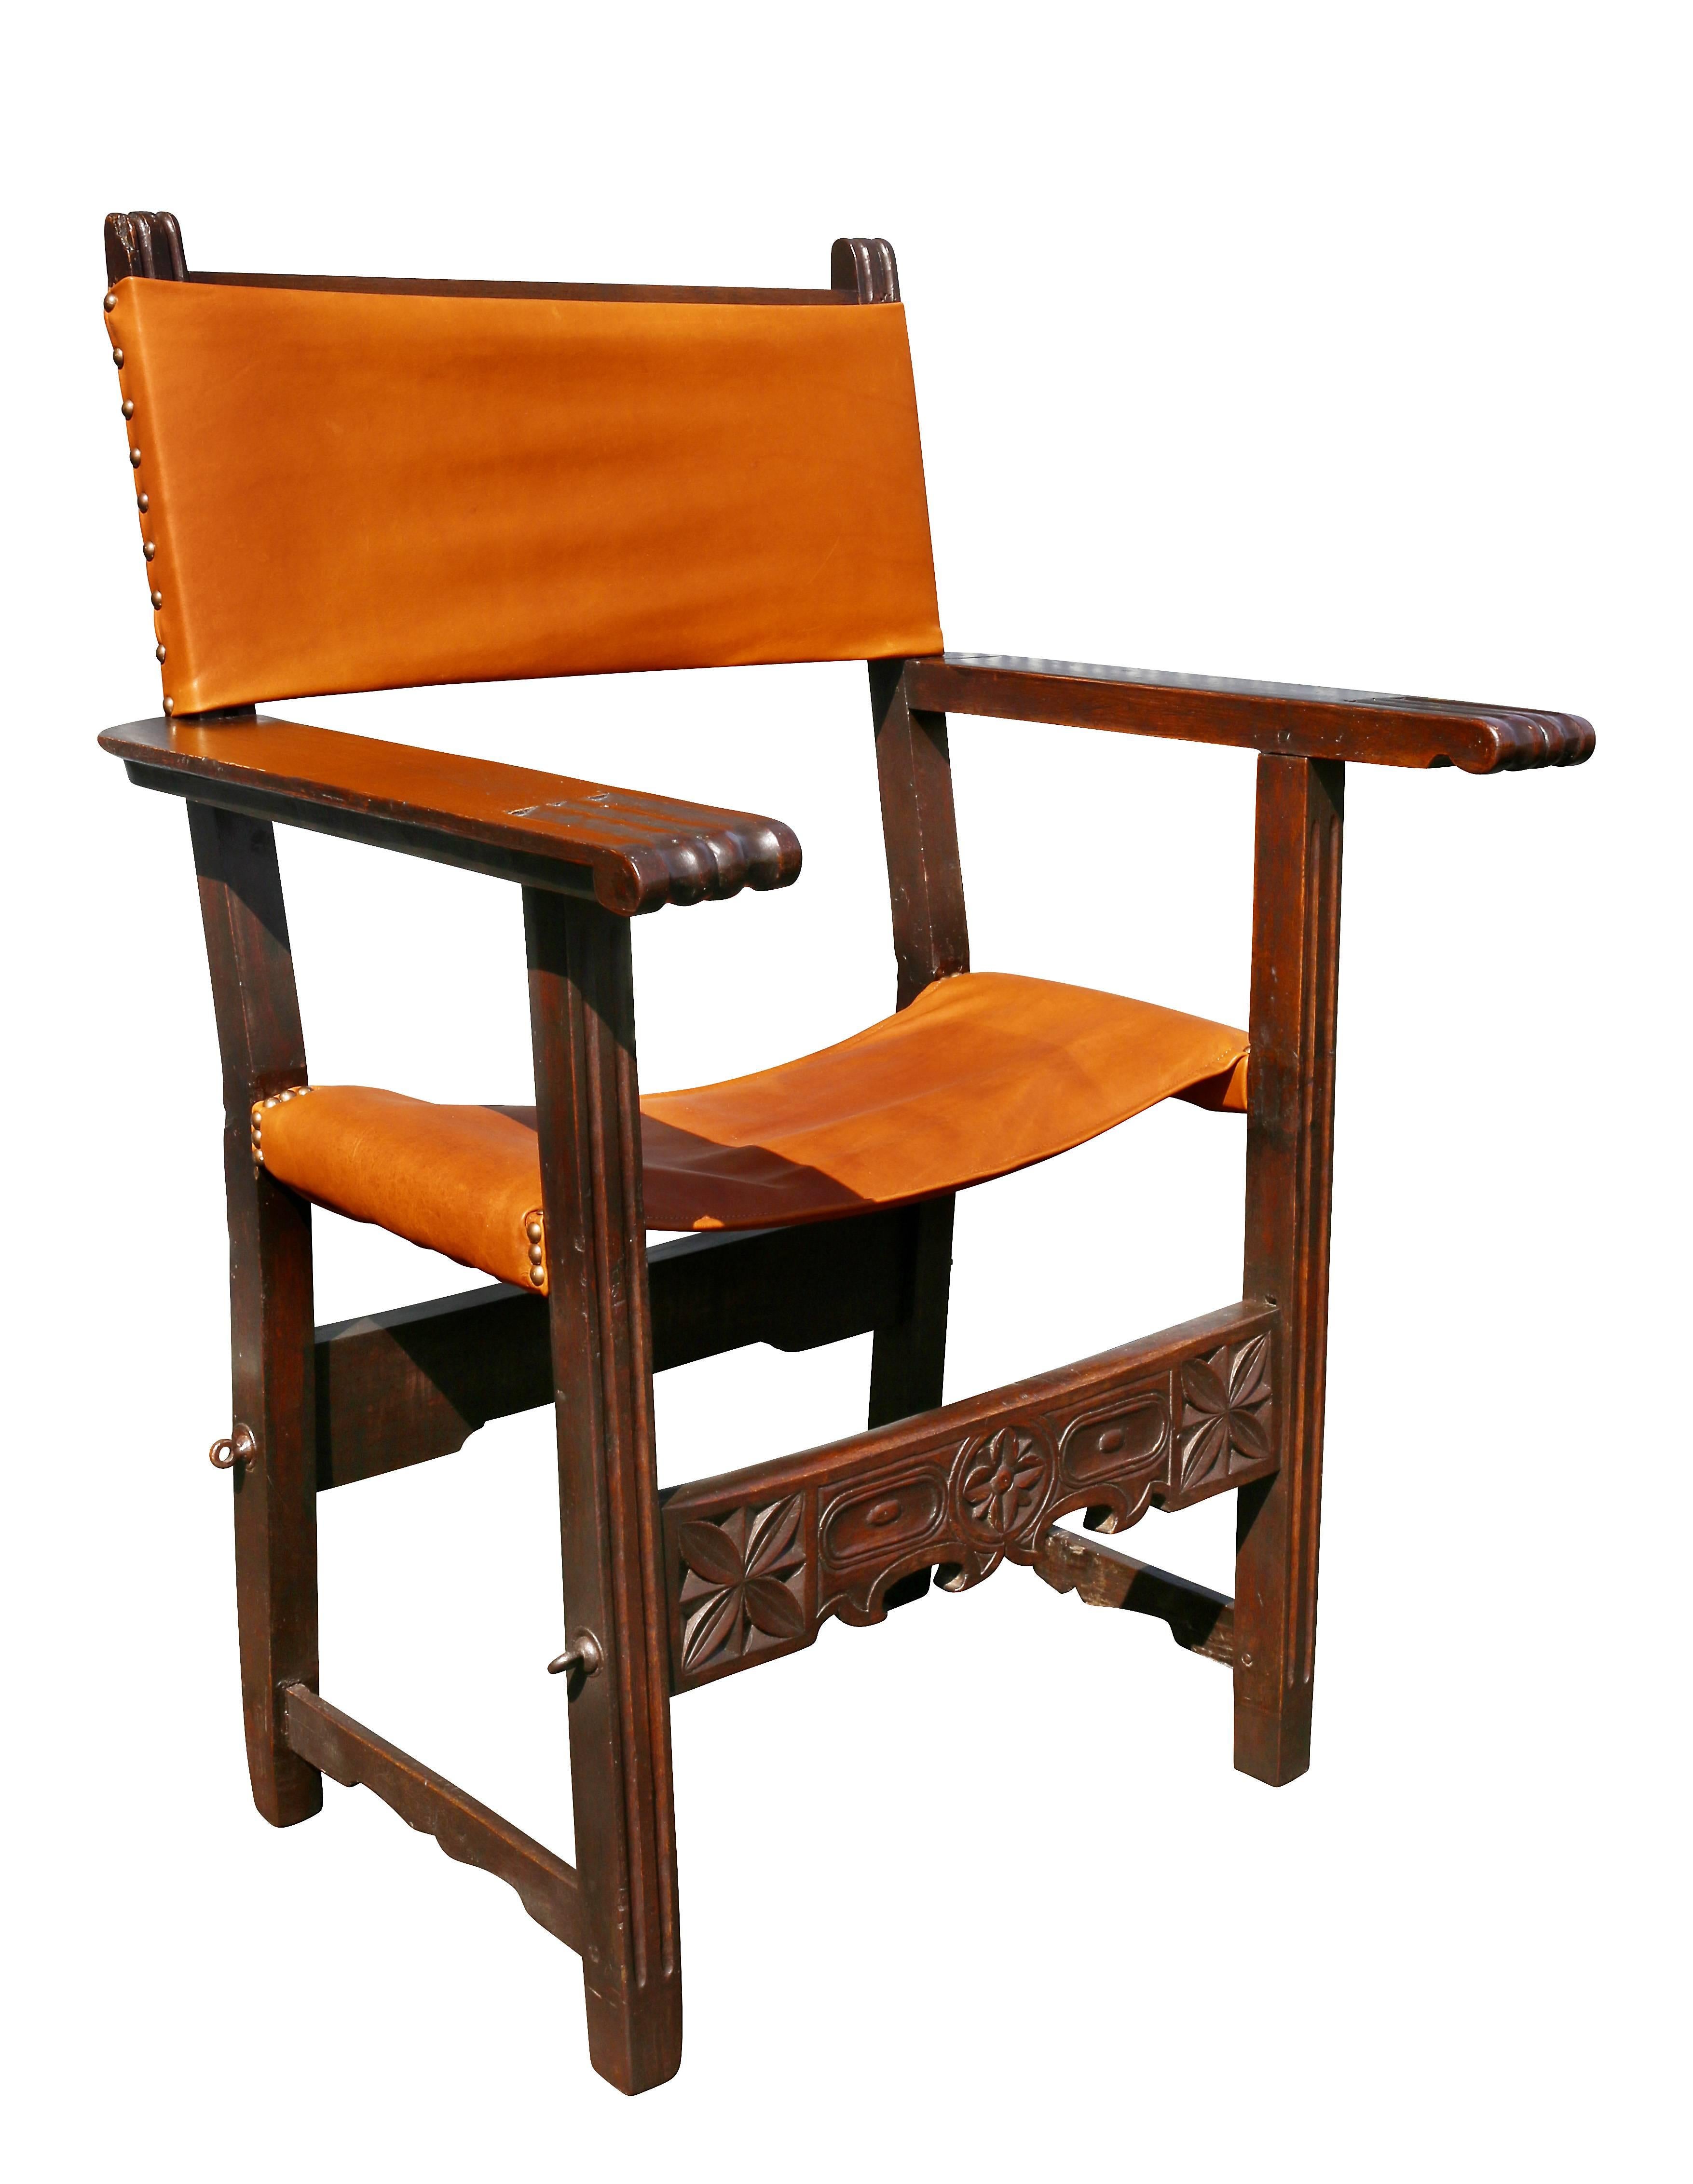 With new leather seat and back, flat arms and carved stretchers. Provenance; Fogg Estate, Chestnut Hill Ma.